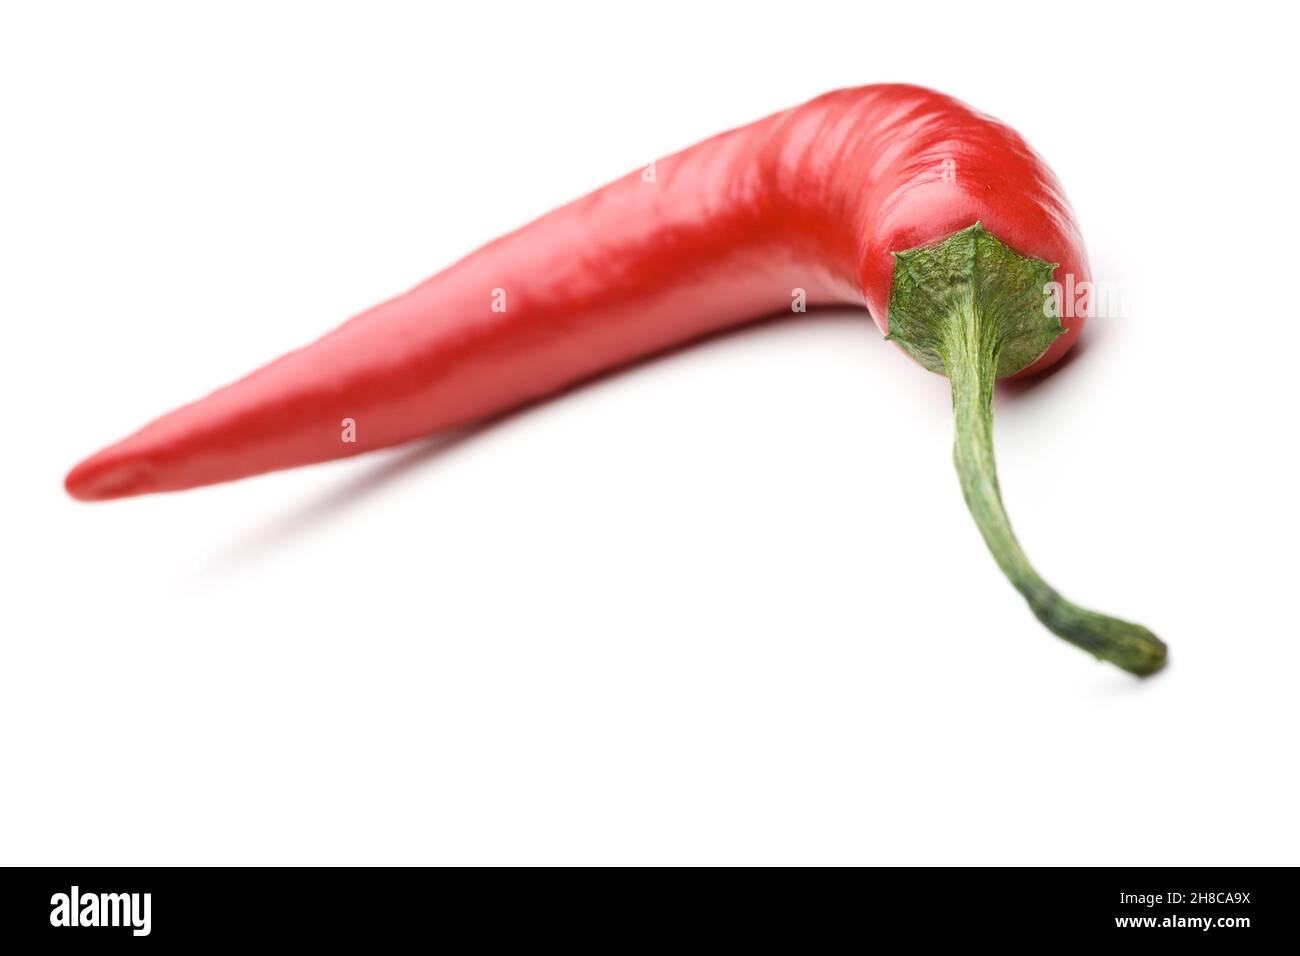 Single red chili pepper lying on white background Stock Photo